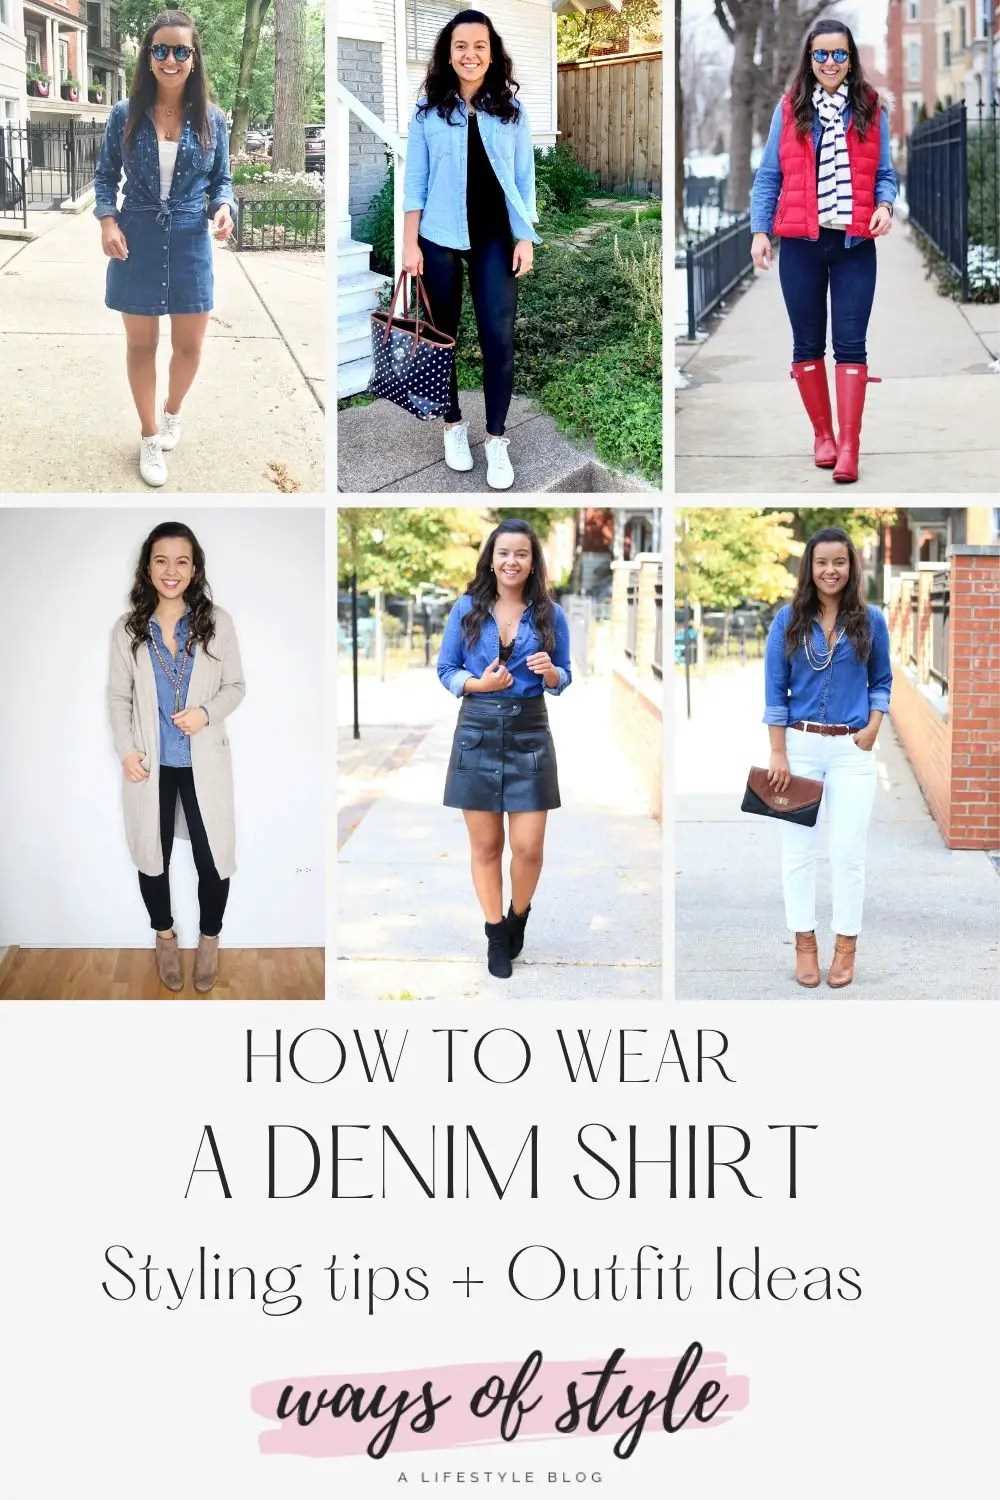 How to wear a denim shirt with jeans